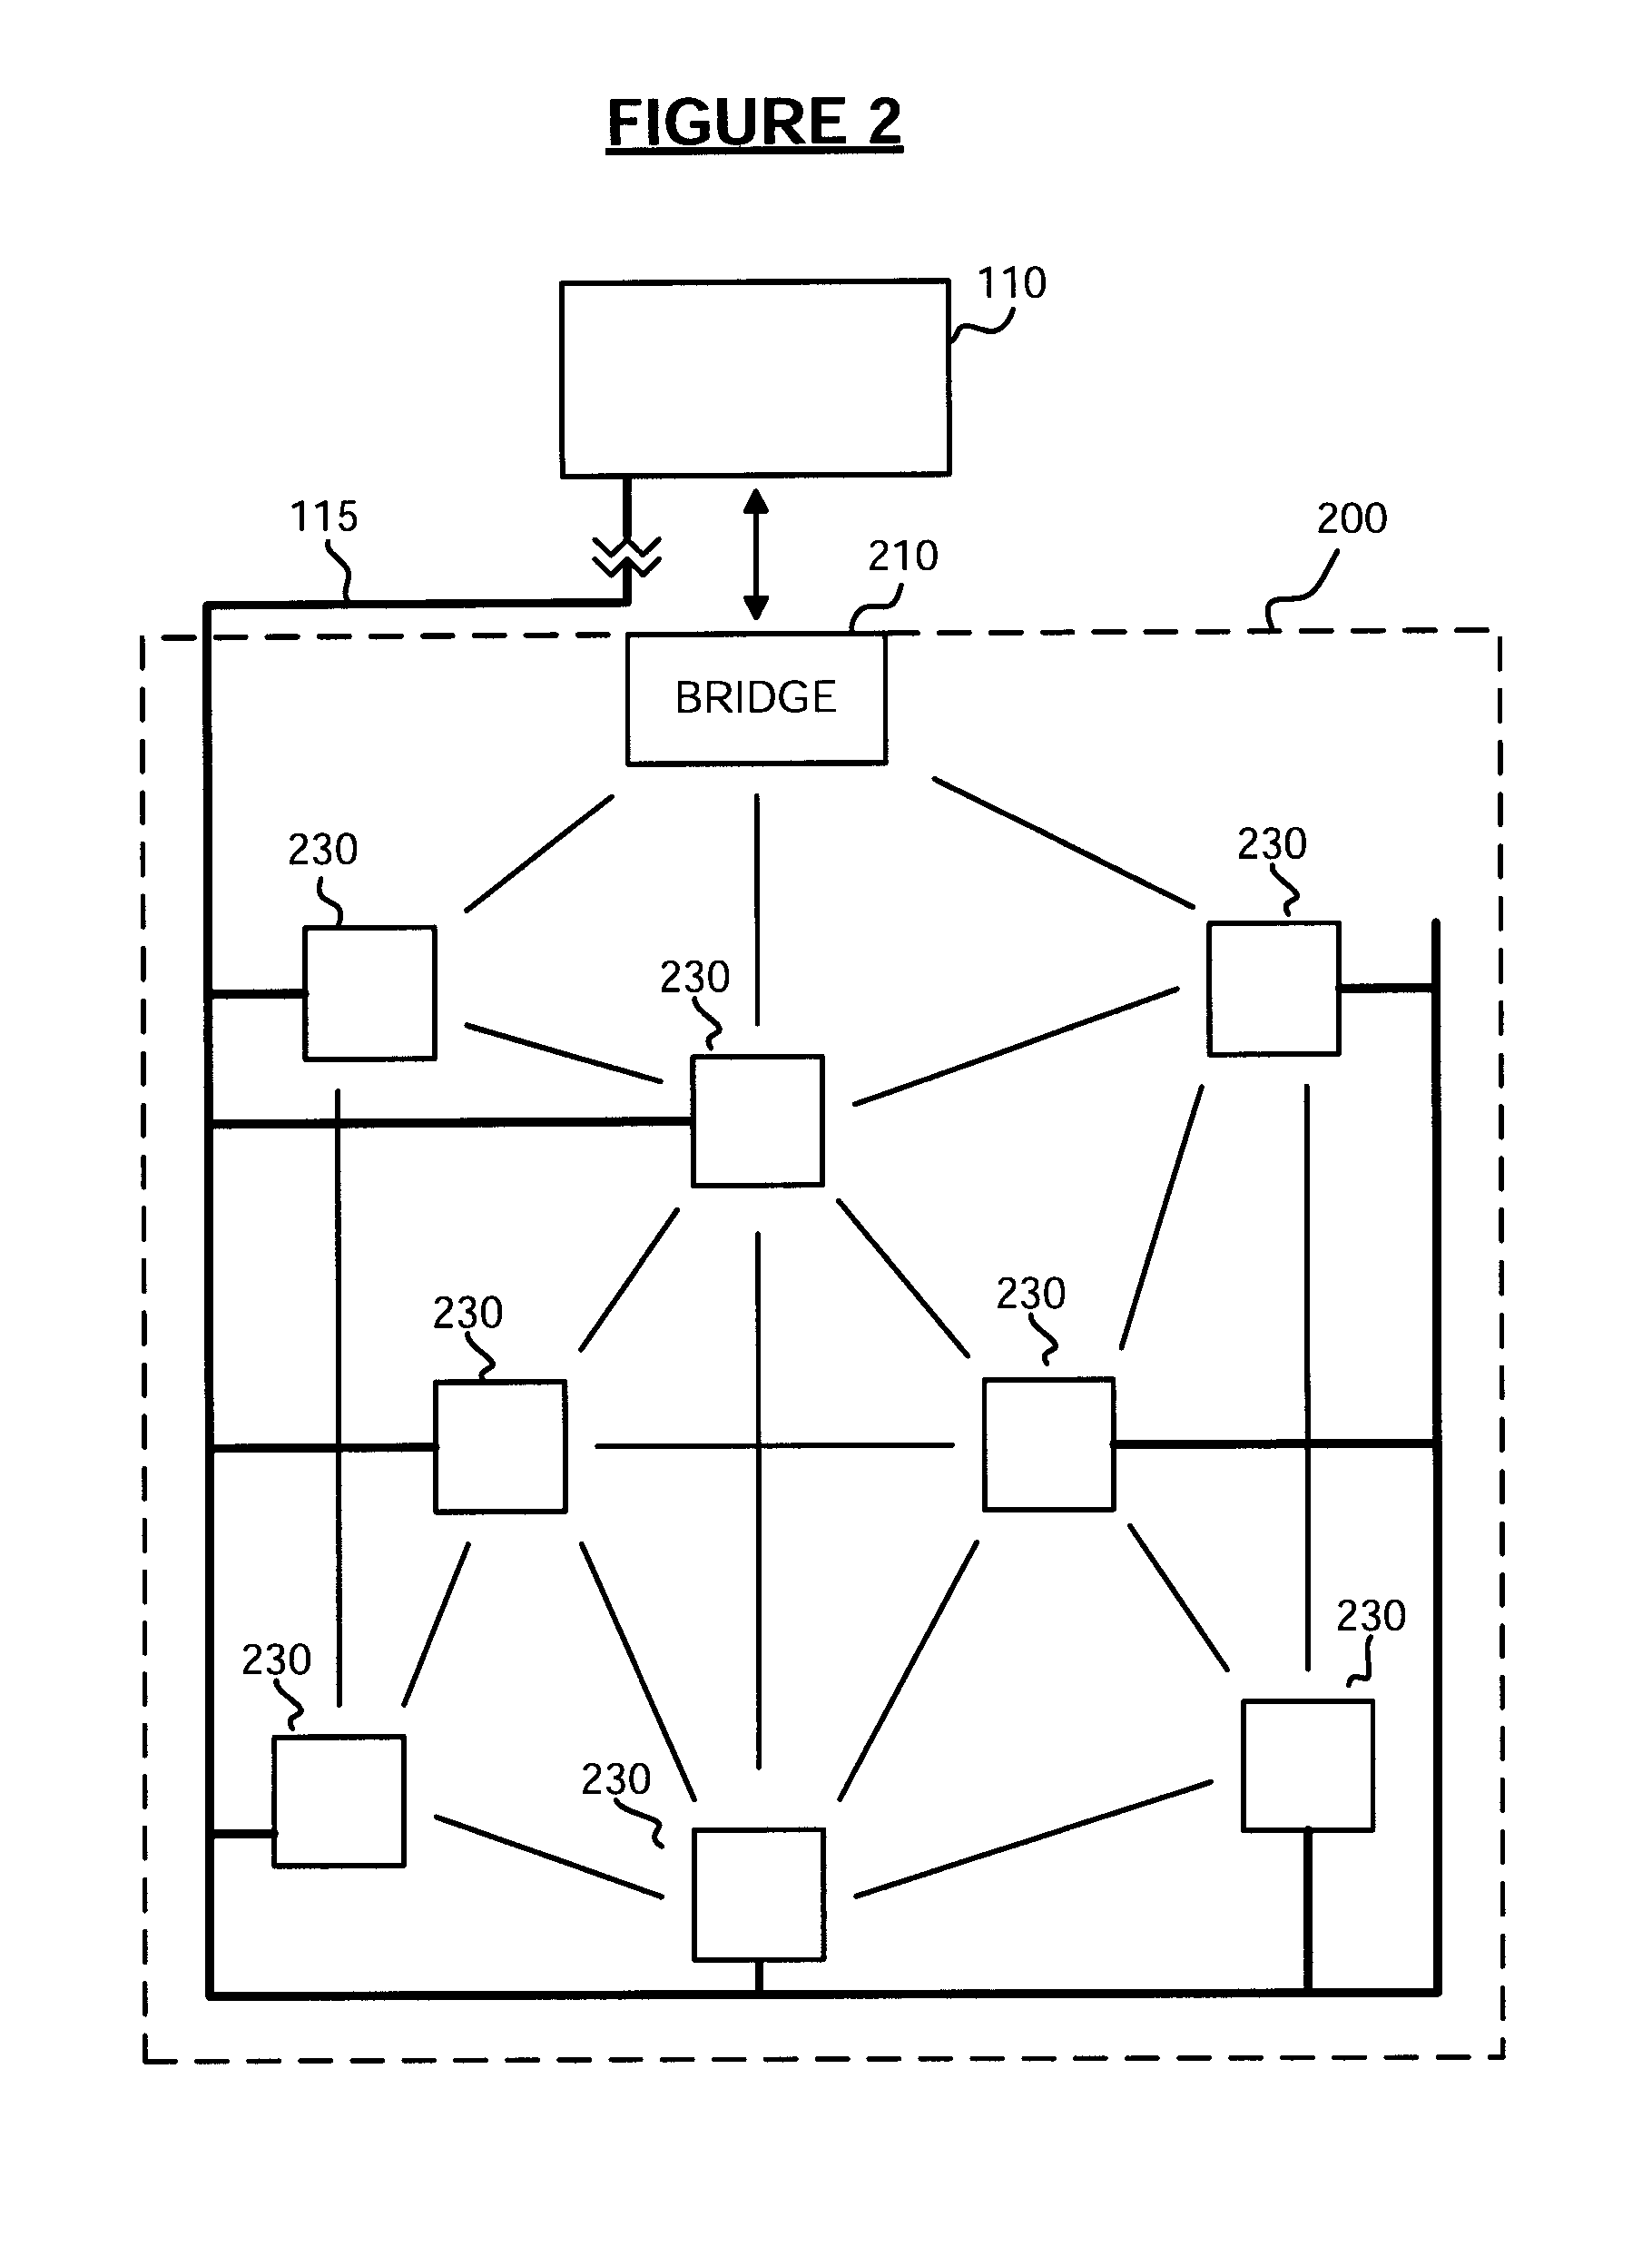 Systems and methods for remote utility metering and meter monitoring